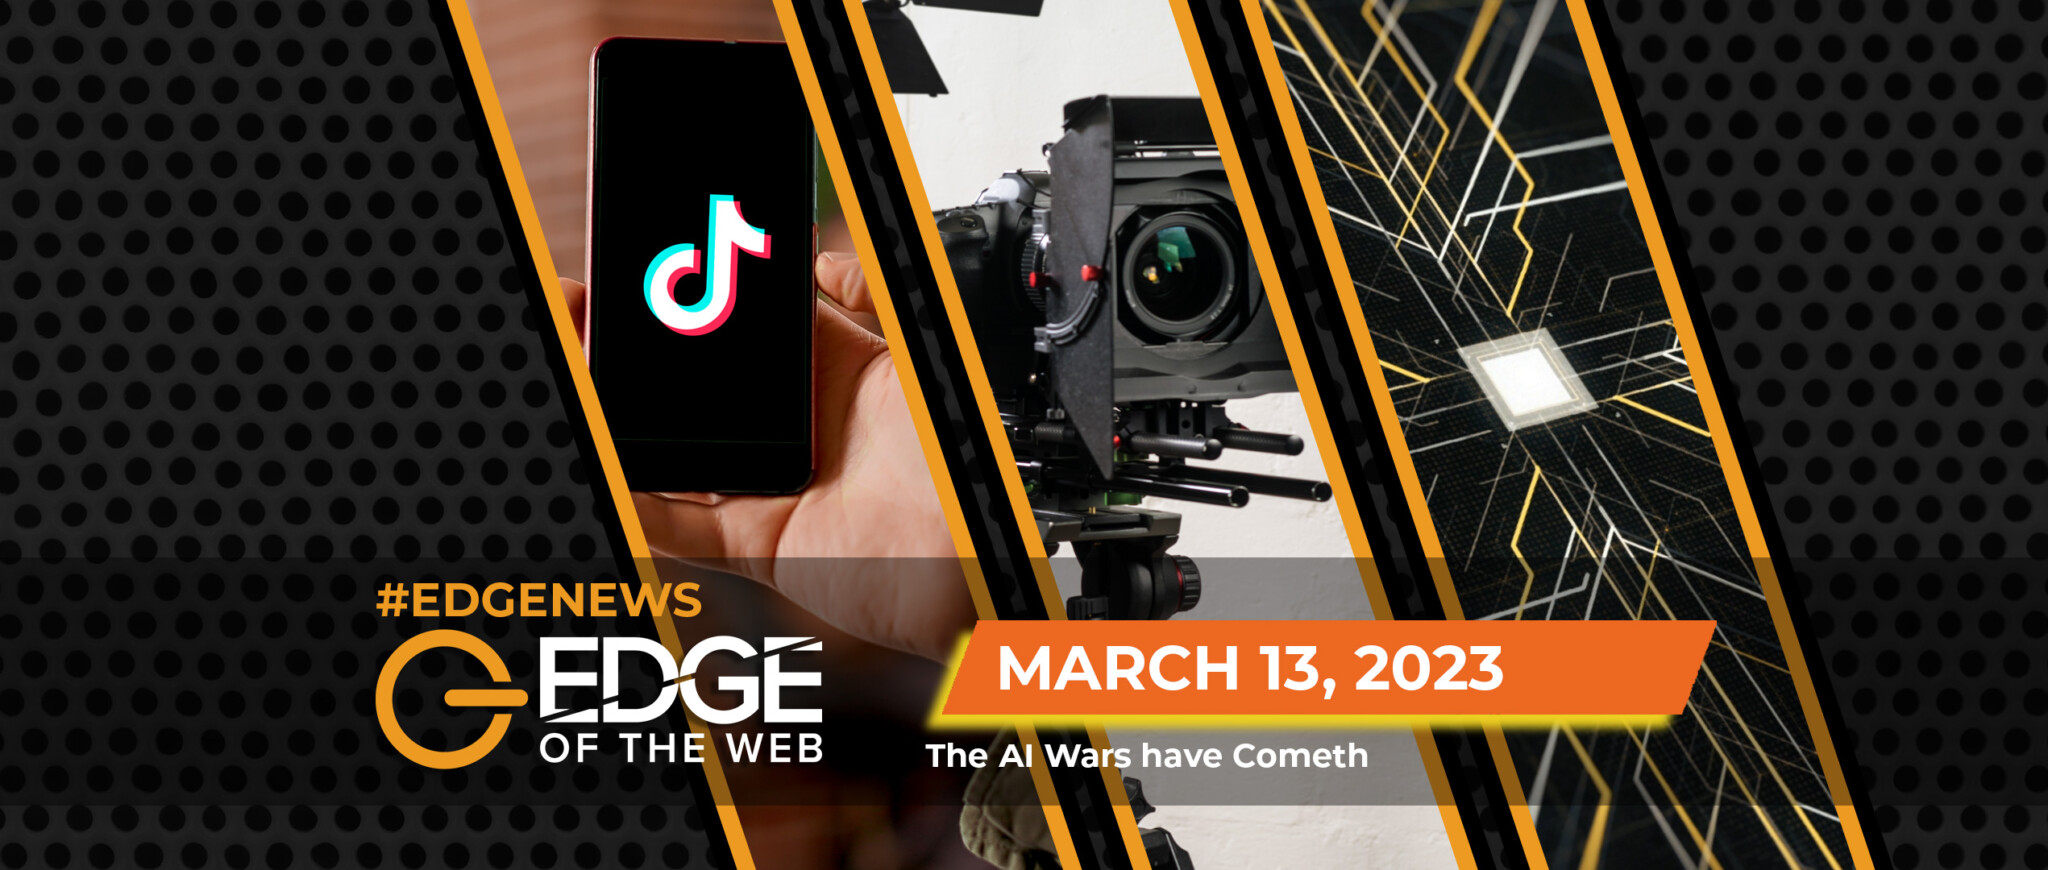 577 | News from the EDGE | Week of 3.13.2023